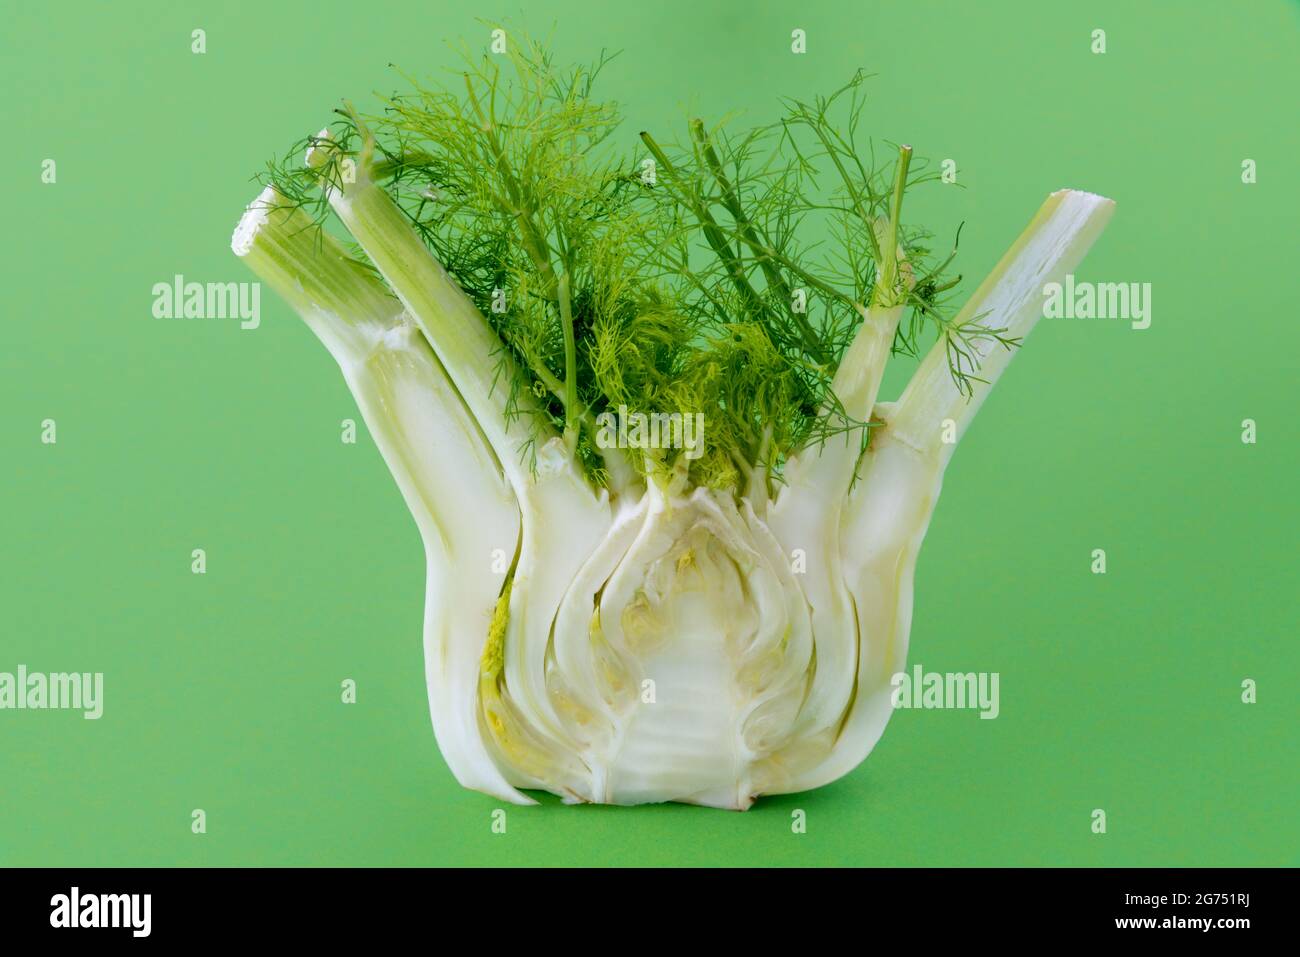 Half cut fresh fennel bulb in cross section isolated on green background, copy space Stock Photo